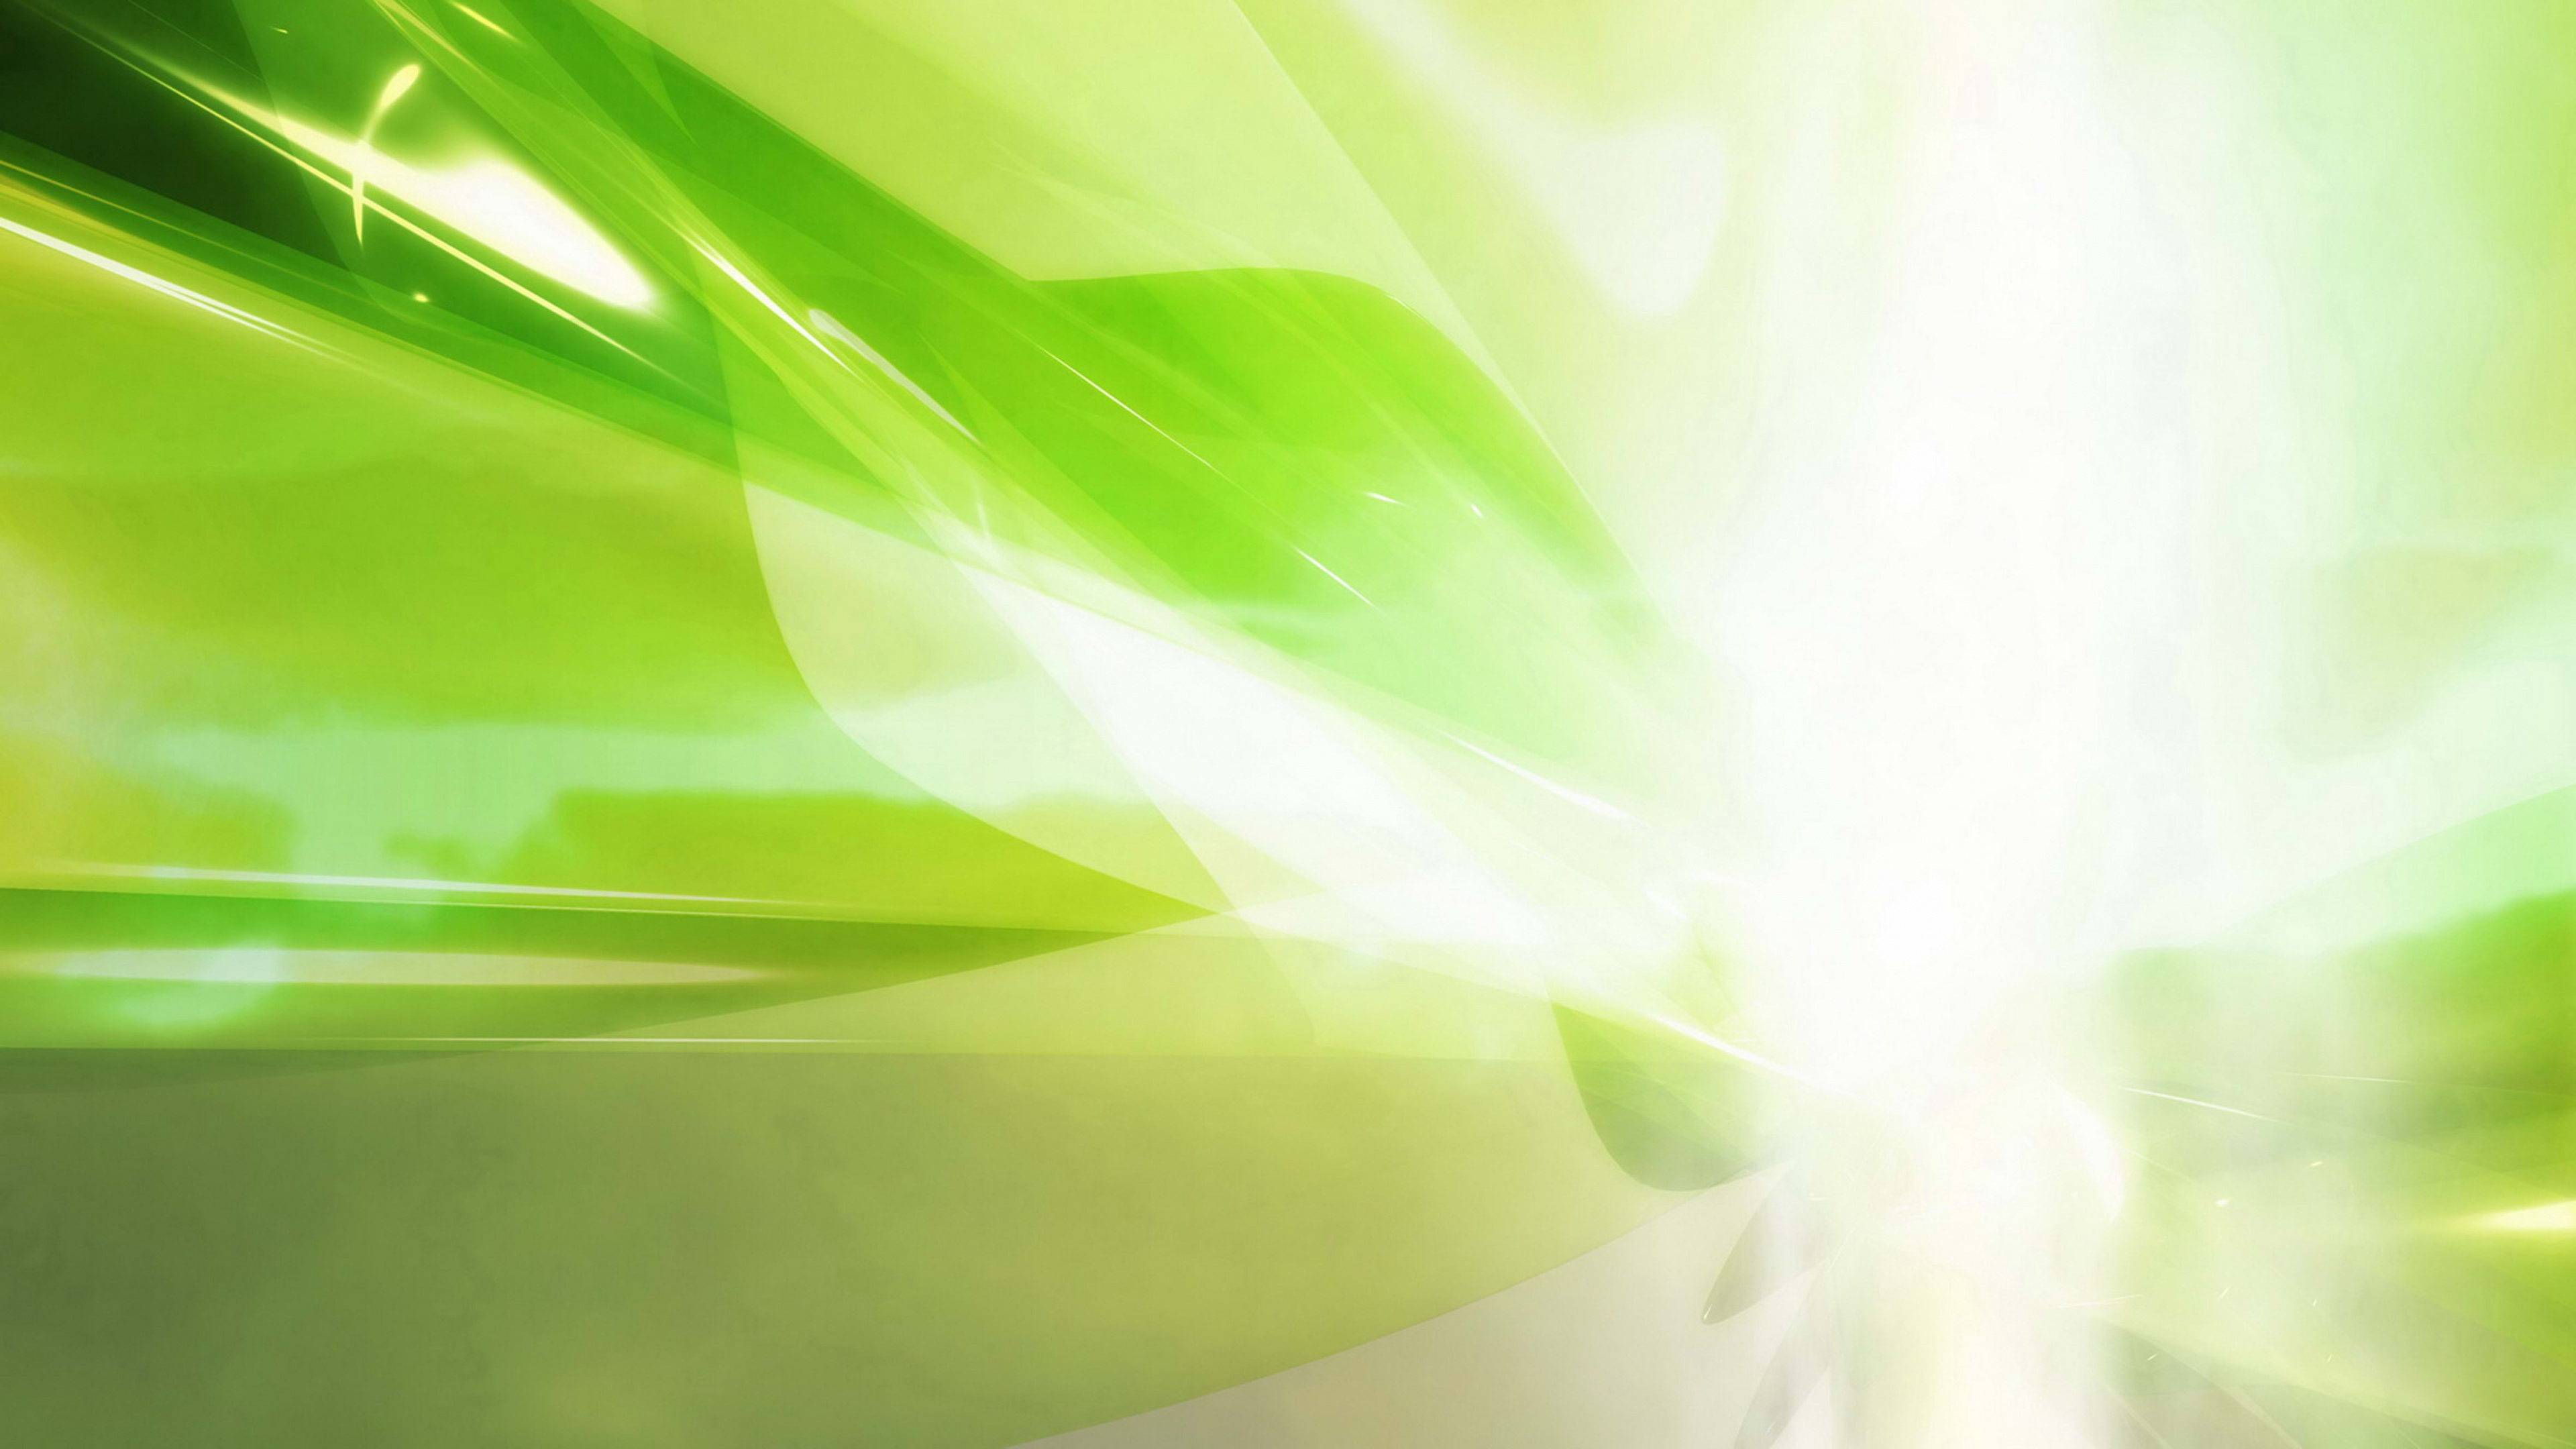 Green and White Abstract Painting. Wallpaper in 3840x2160 Resolution